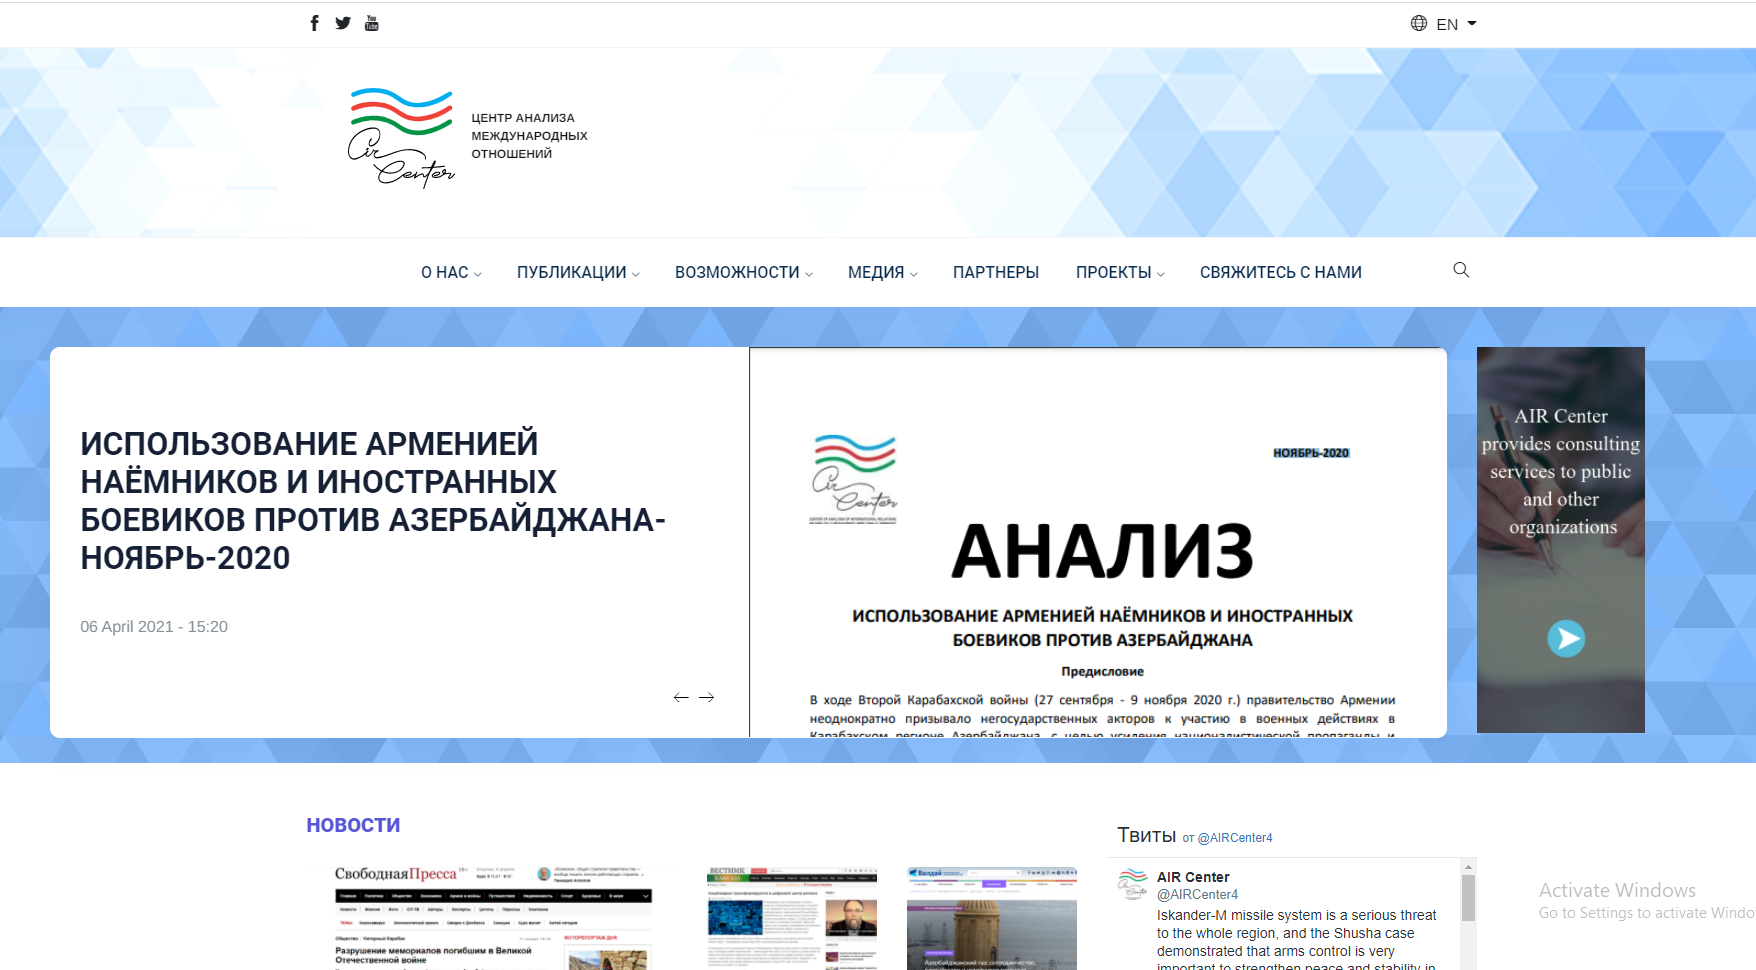 The Russian version of the website of the Center of Analysis of International Relations has been launched